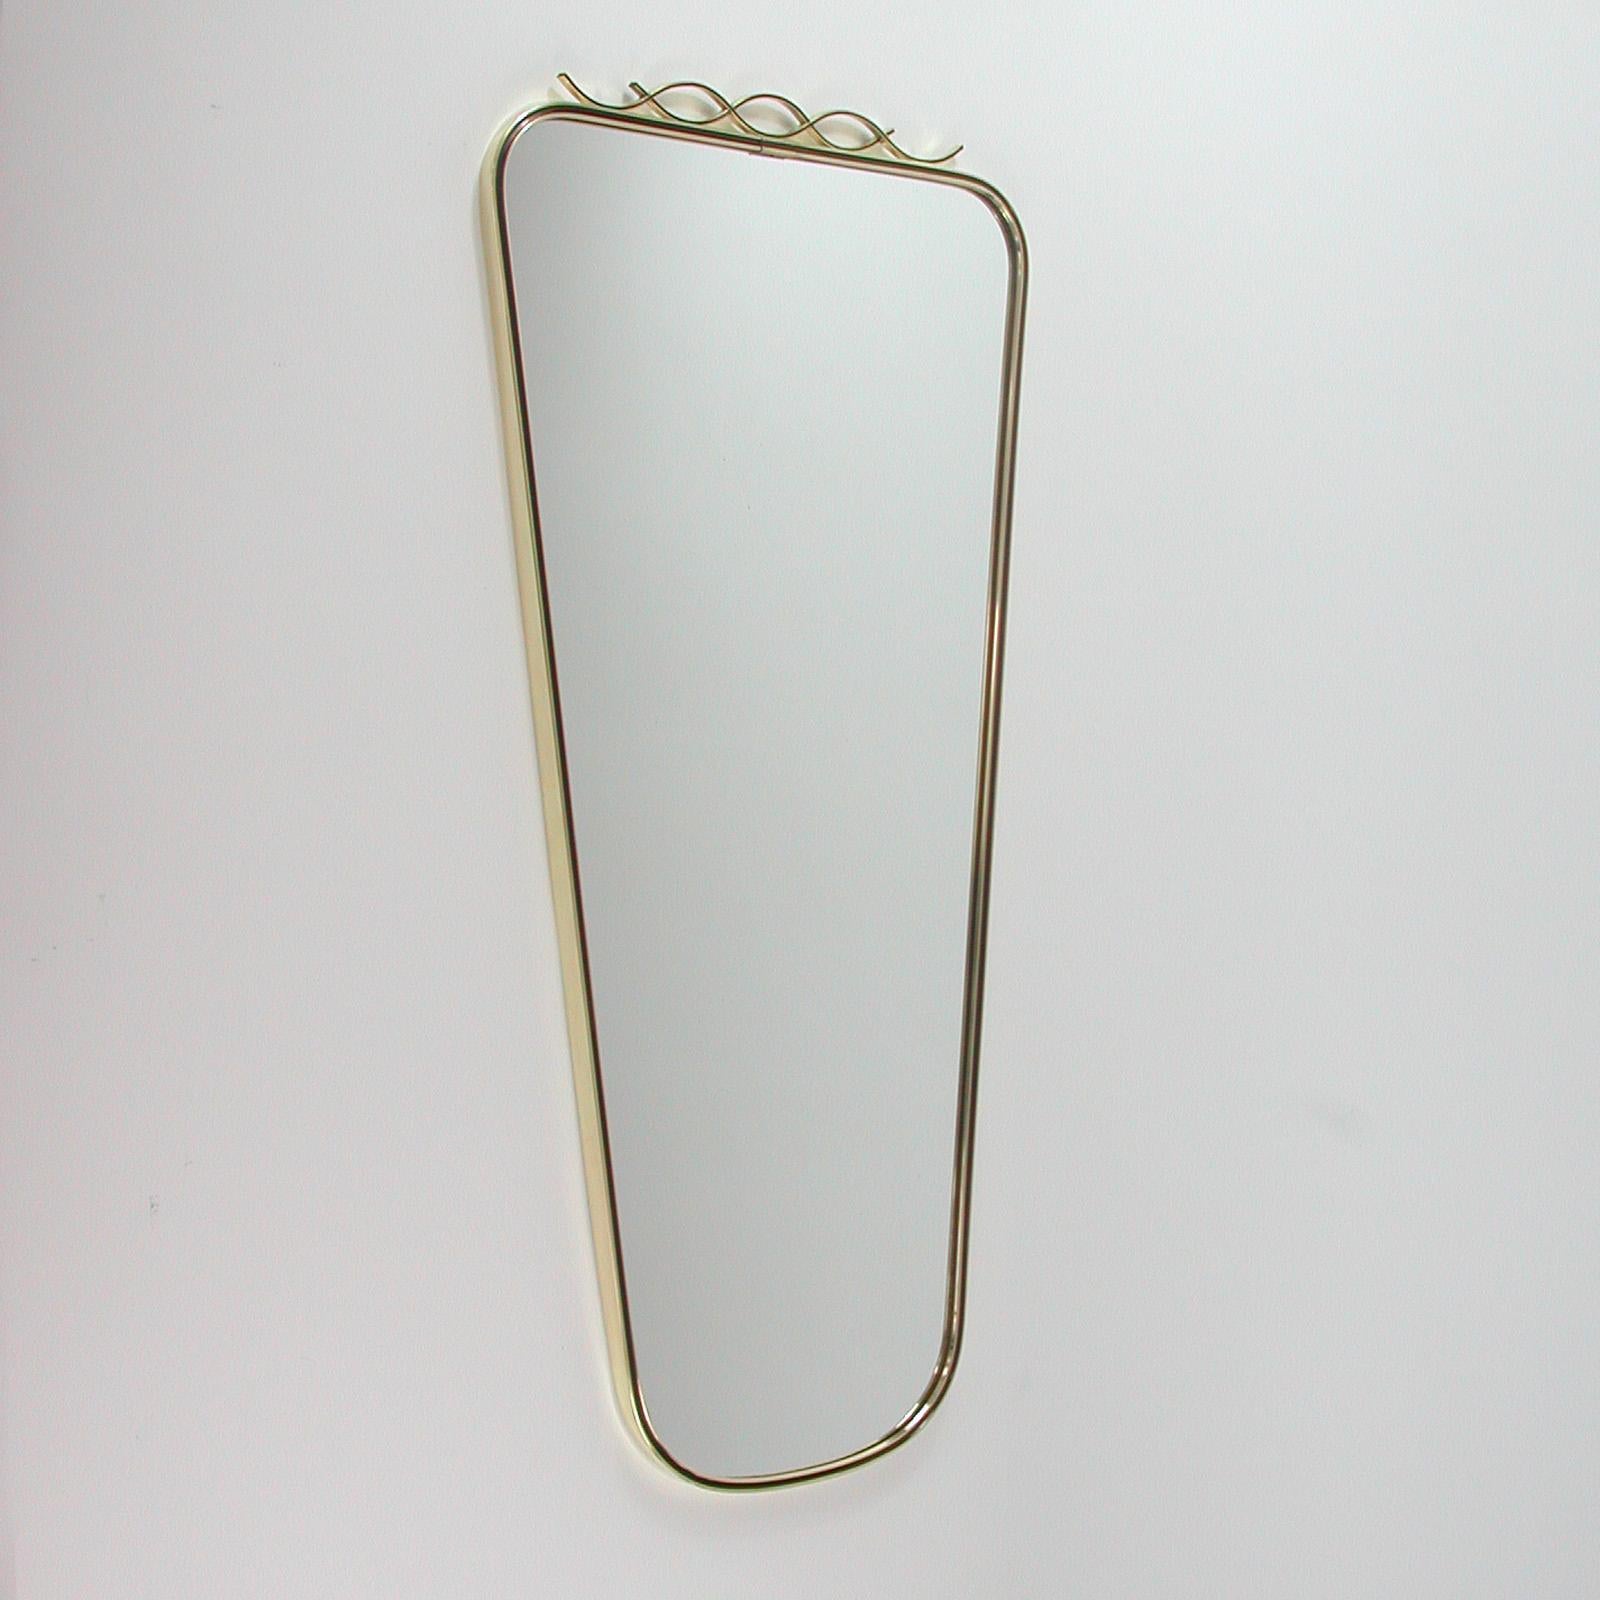 This beautiful rectangular midcentury wall mirror features a brass frame with black enamel decor and a looped brass finial. It was designed and manufactured in Germany in the 1950s by Münchner Zierspiegel (Münchner Zierform).

The mirror is in